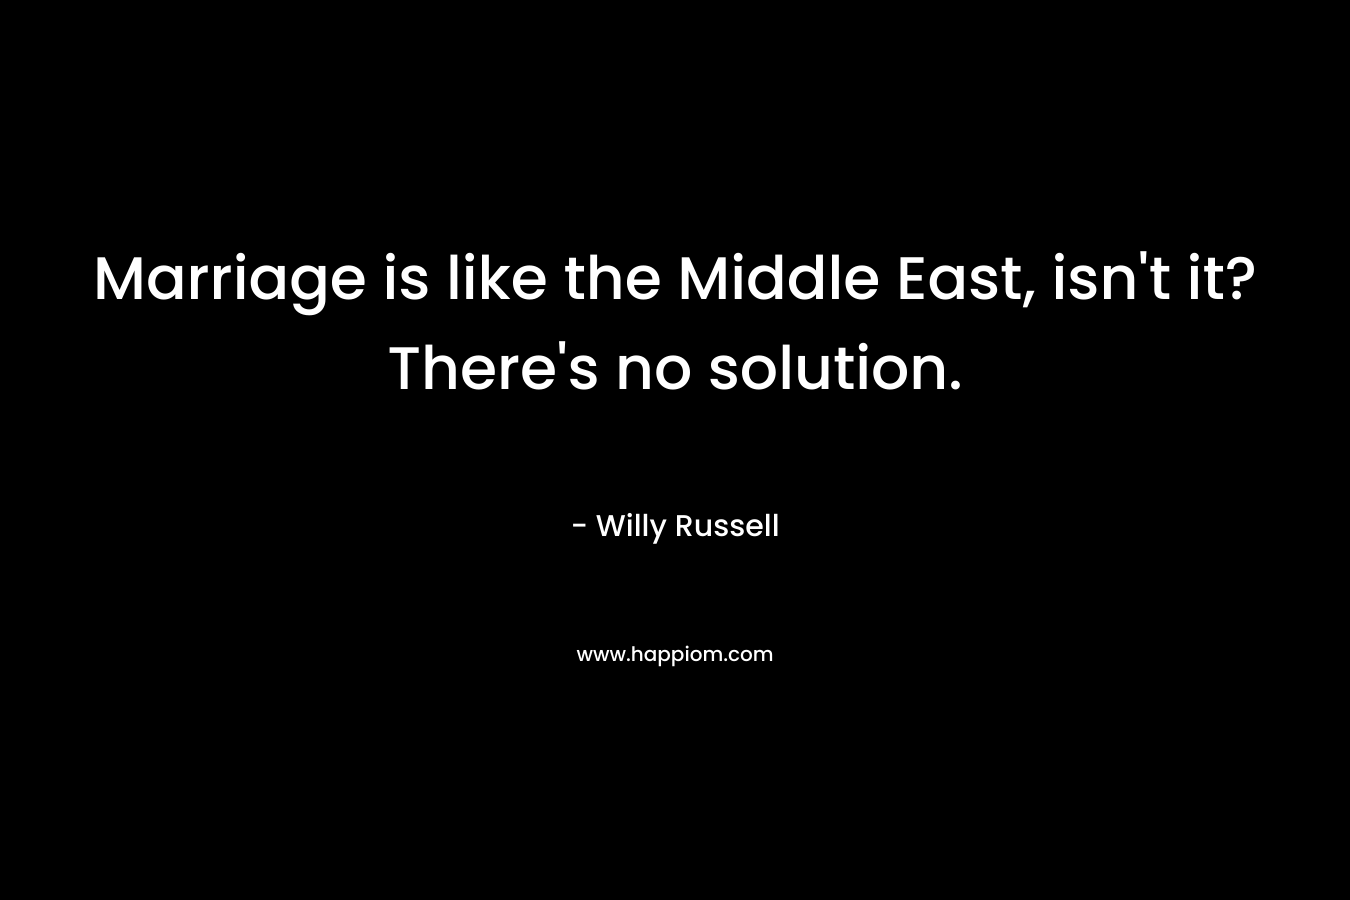 Marriage is like the Middle East, isn’t it? There’s no solution. – Willy Russell